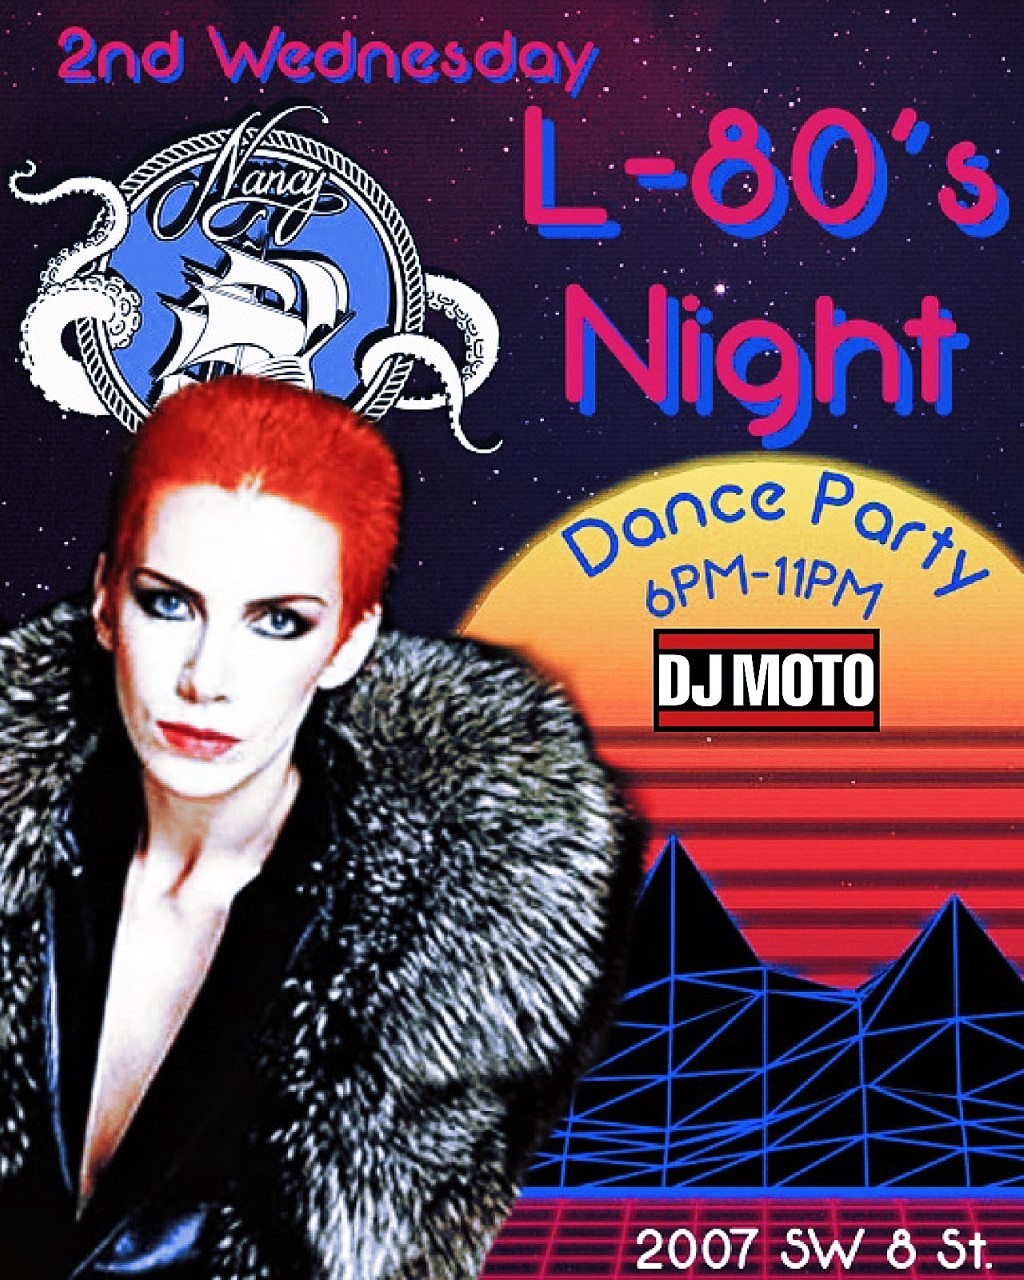 L80’s NIGHT DANCE PARTY! DJ MOTO! 2nd Wednesday of Every Month!